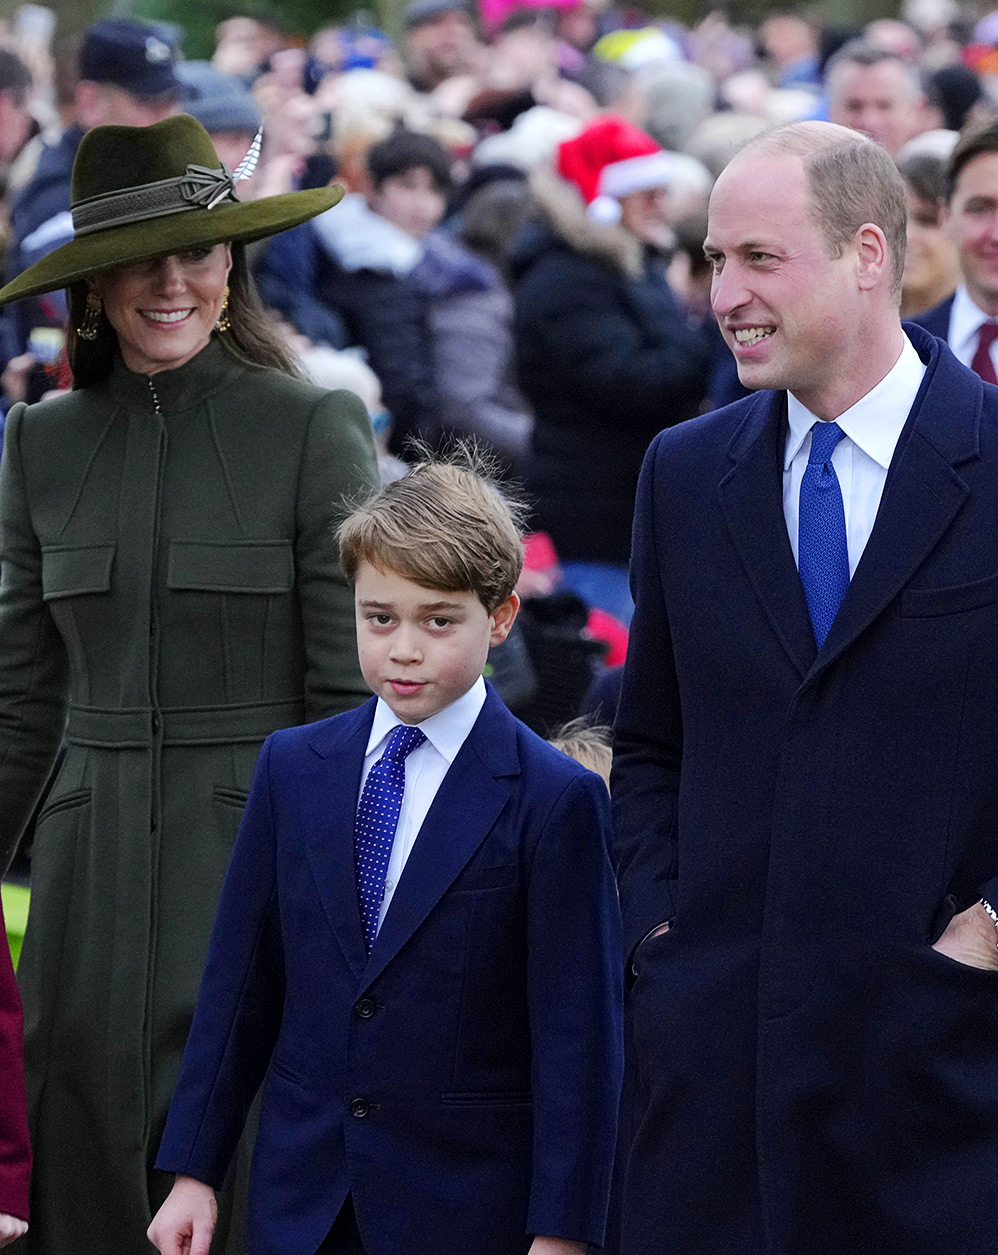 Prince-William-and-Princess-Kate-Share-Son-Prince-Georges-Holiday-Painting-of-a-Reindeer-See-the-Portrait-214.jpg